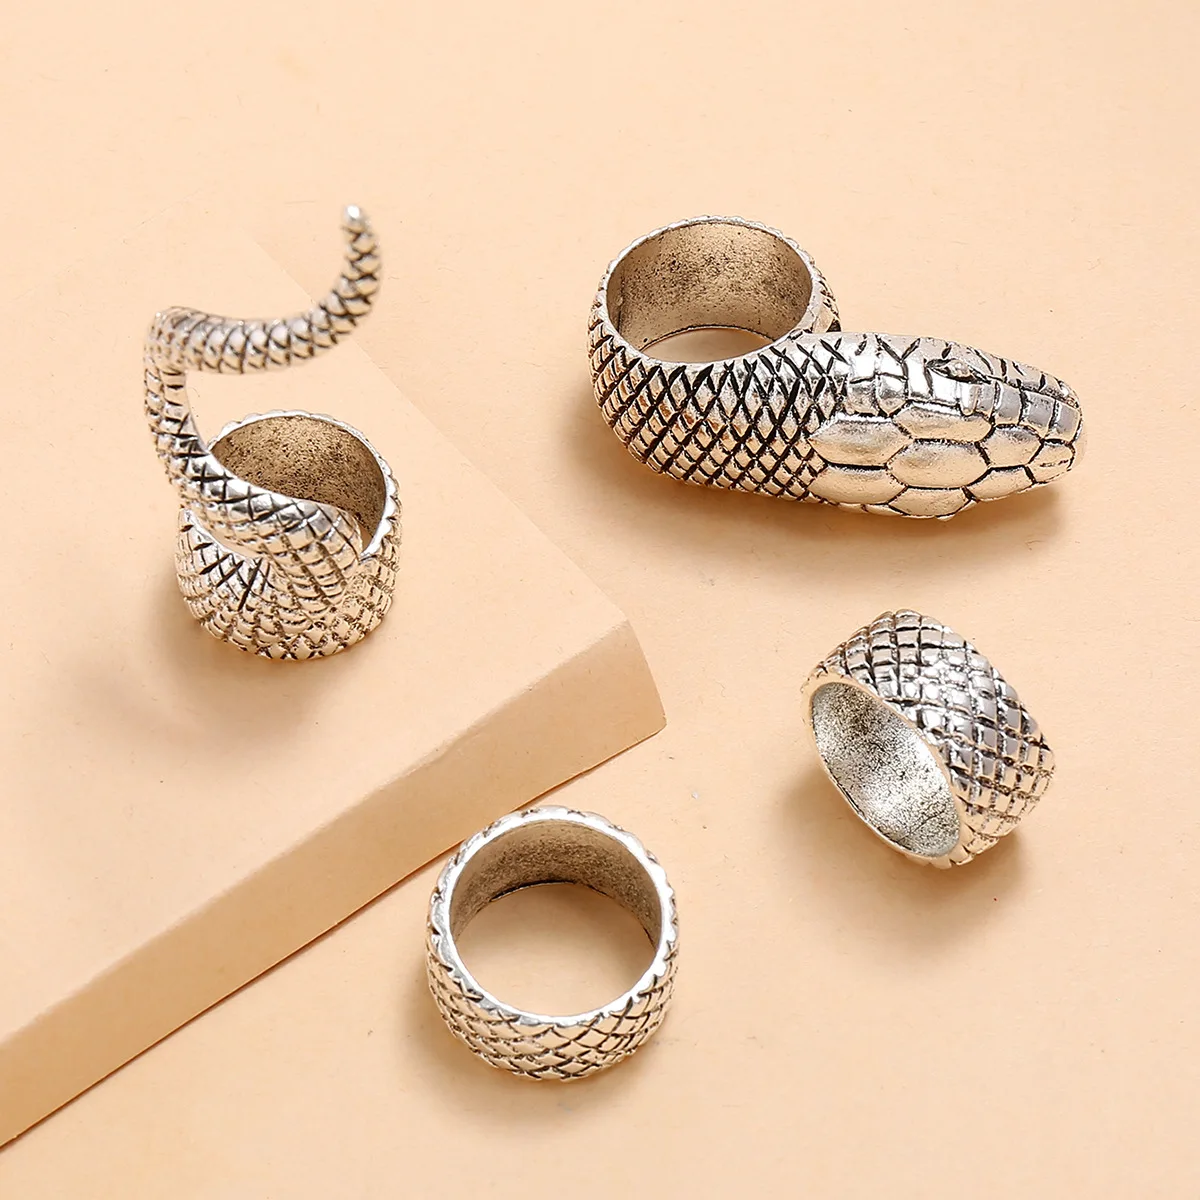 

4 Pieces Set Retro Punk Snake Ring For Men Women Exaggerated Antique Silver Opening Adjustable Rings, As shown